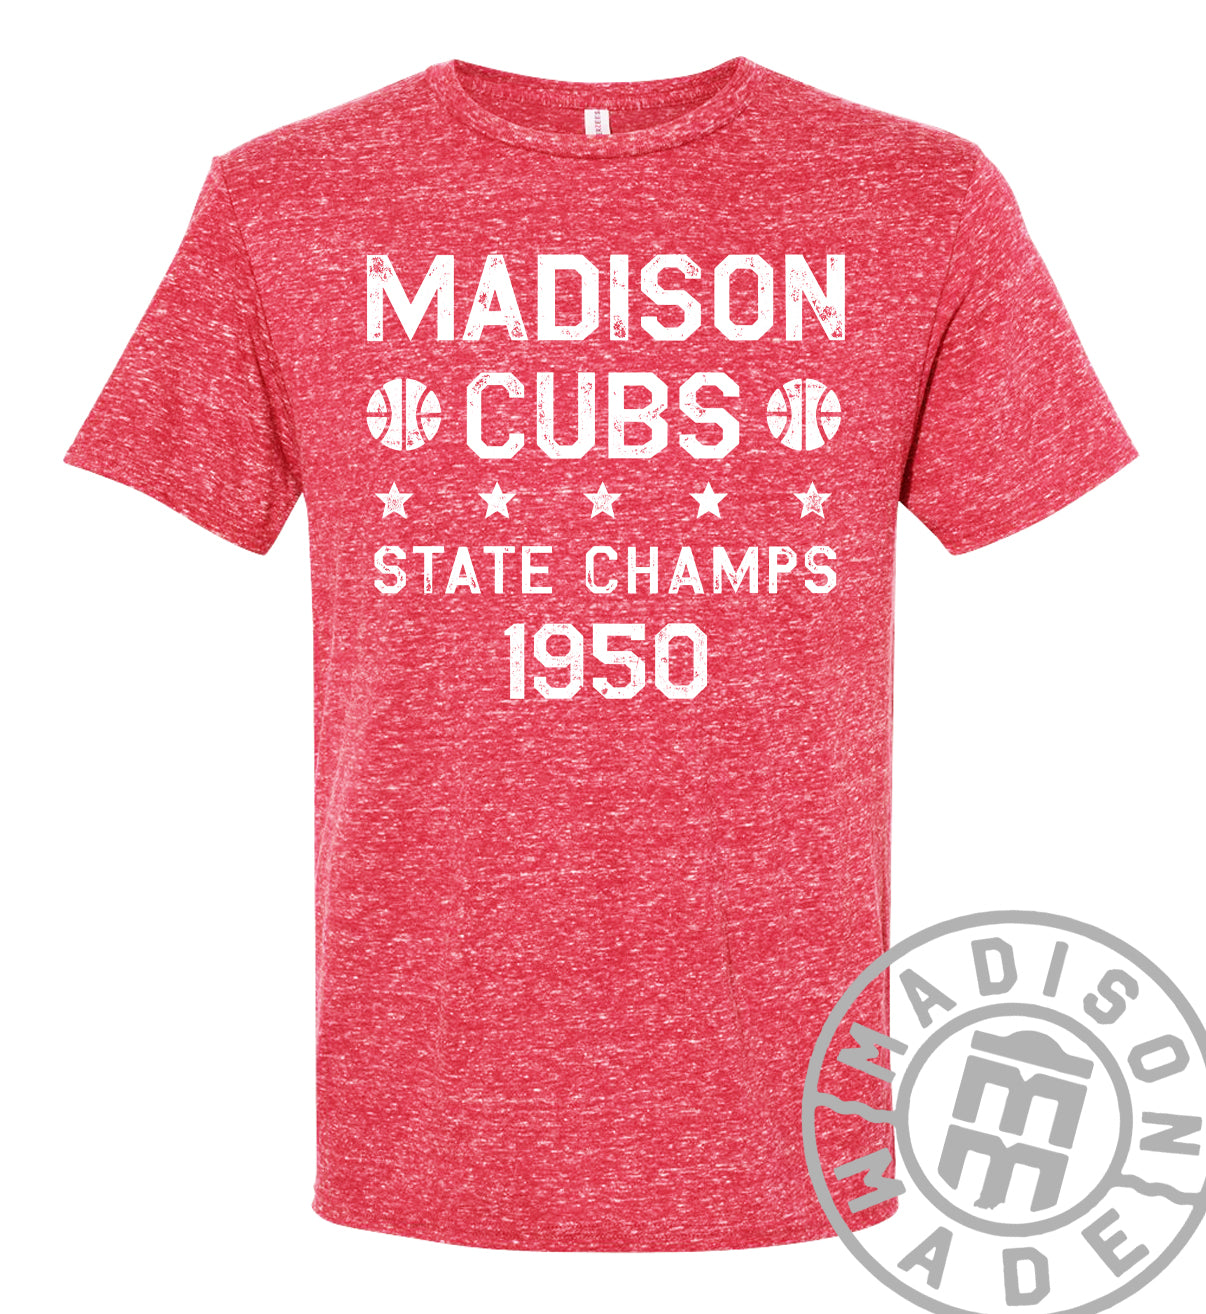 1950 State Champs Red Tee